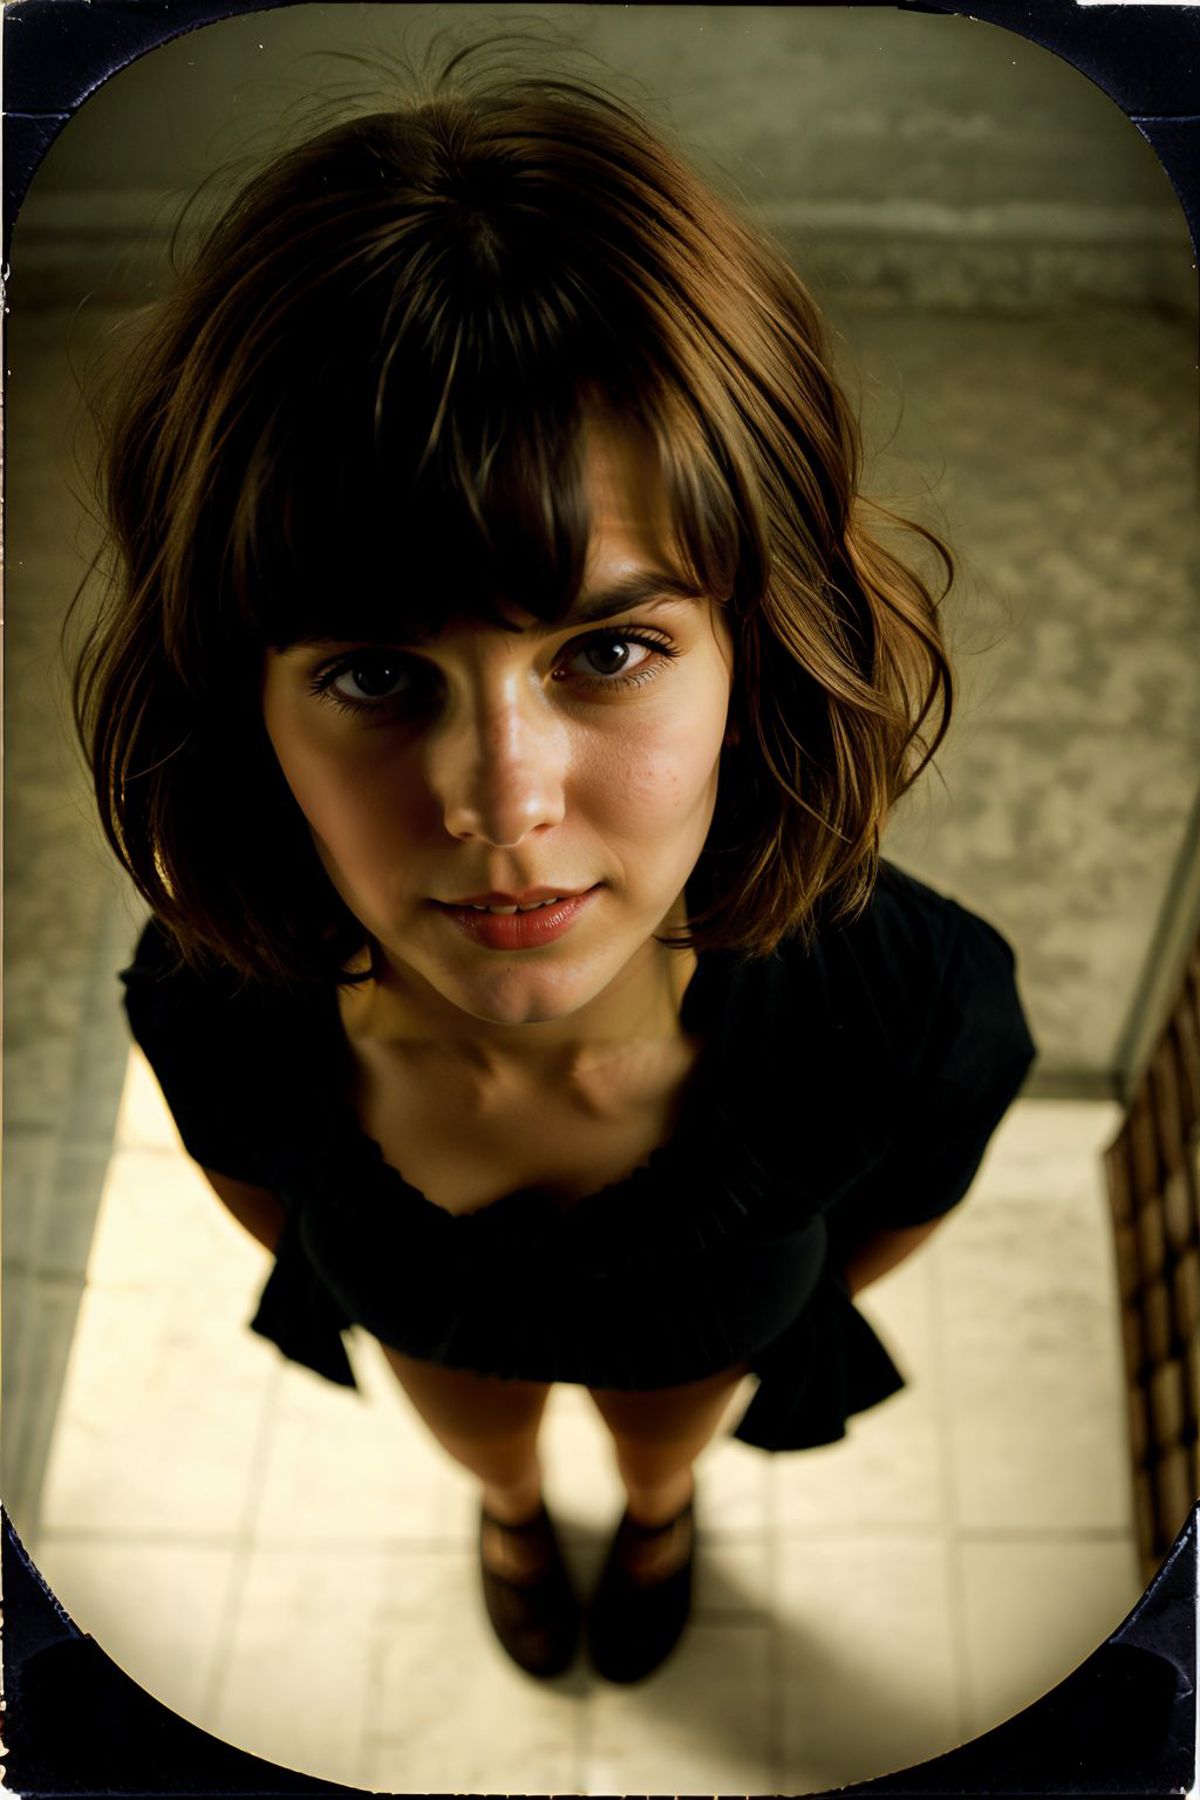 A brown-haired woman in a black shirt and short skirt looking up.